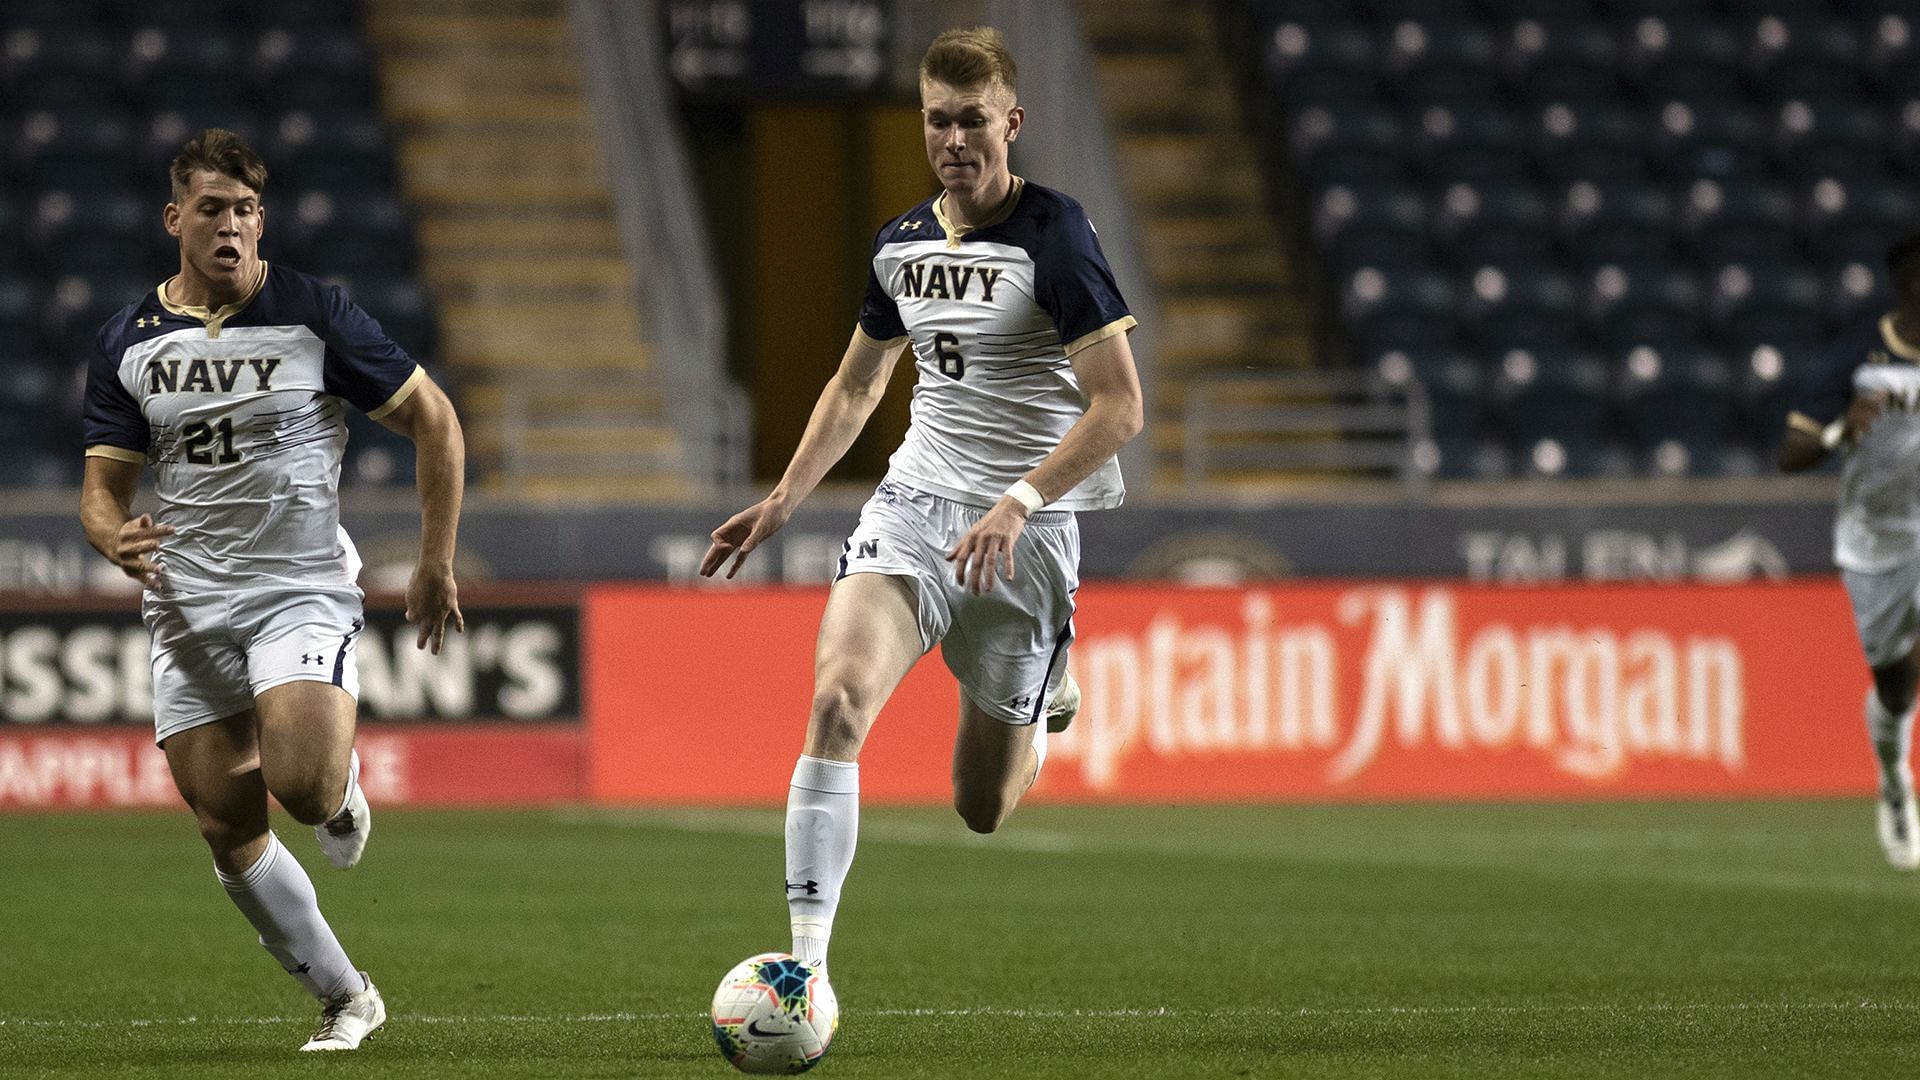 The ex-Navy soccer player is the only one on the list to have a 4-star or above Weak Foot attribute (Image via US Navy Sports)